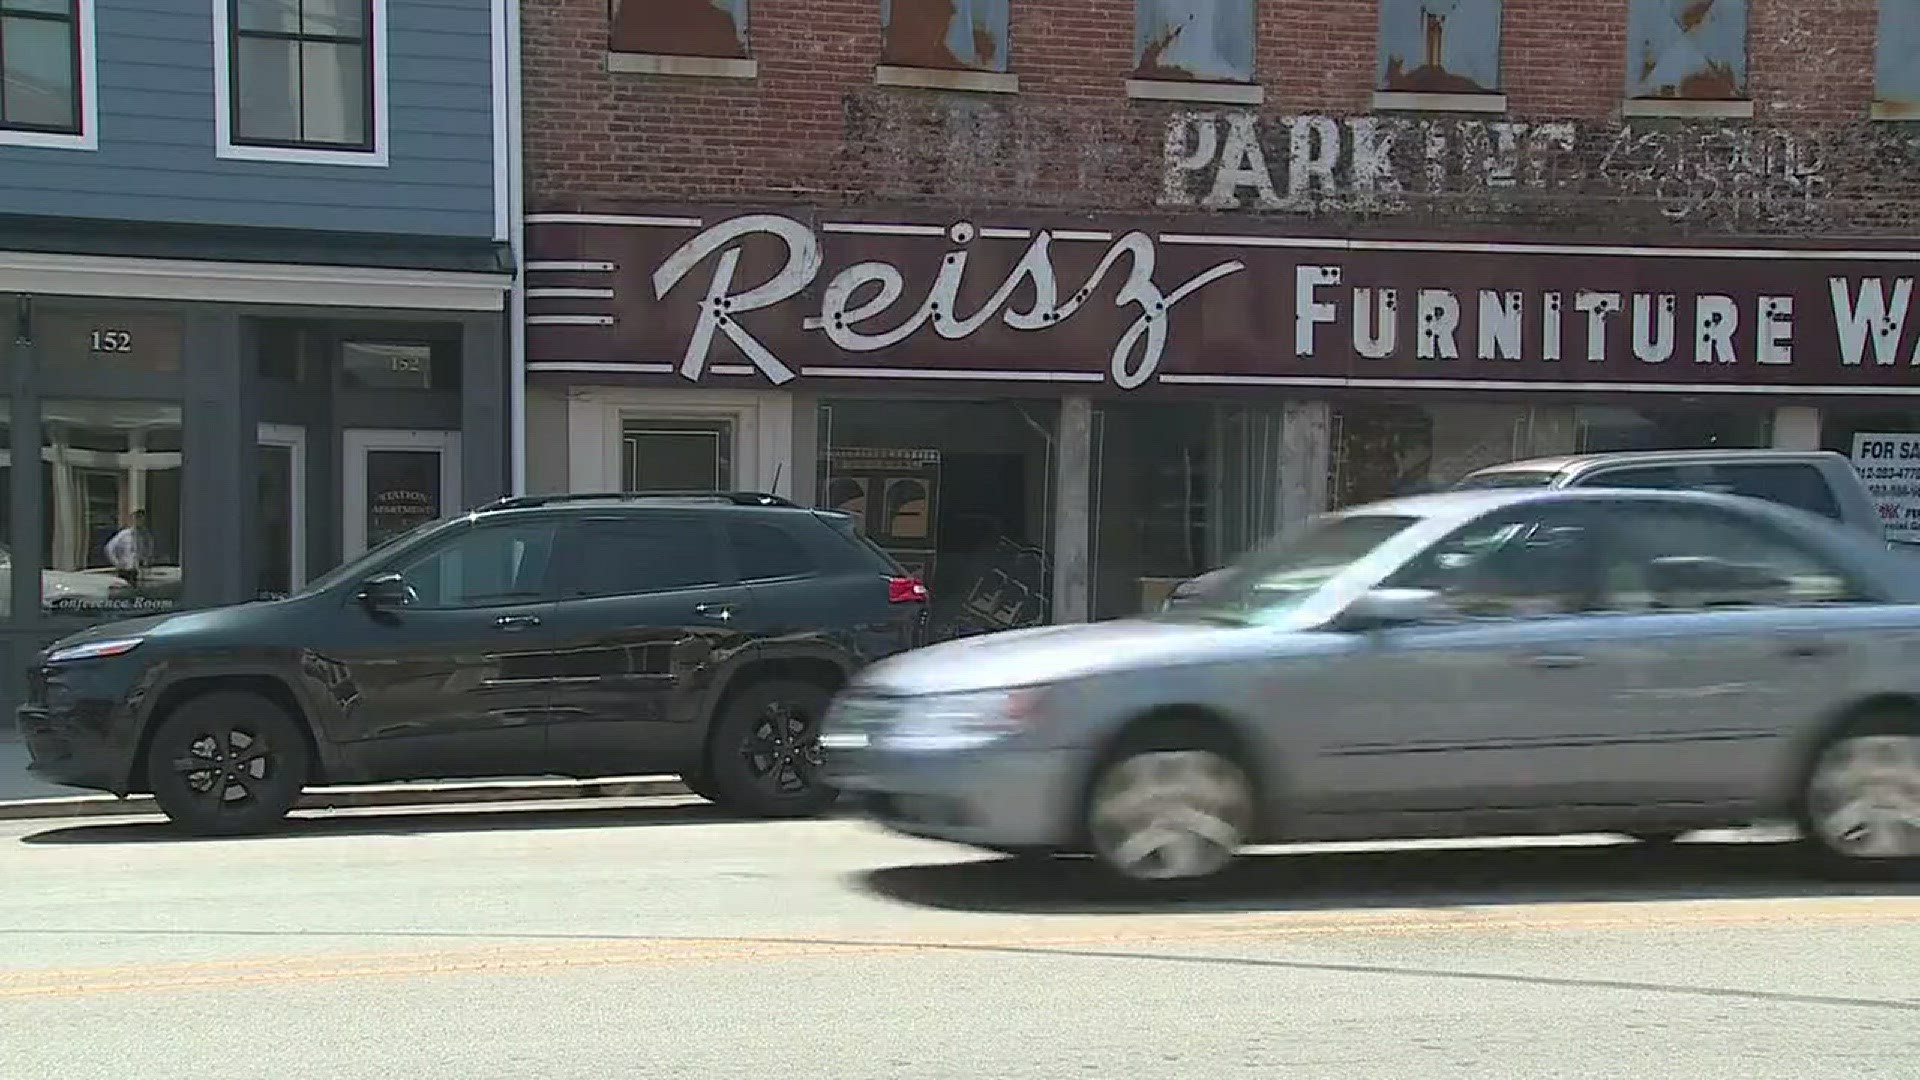 The City of New Albany is working on several historic renovation problems, one converting an abandoned furniture store into the new city hall.